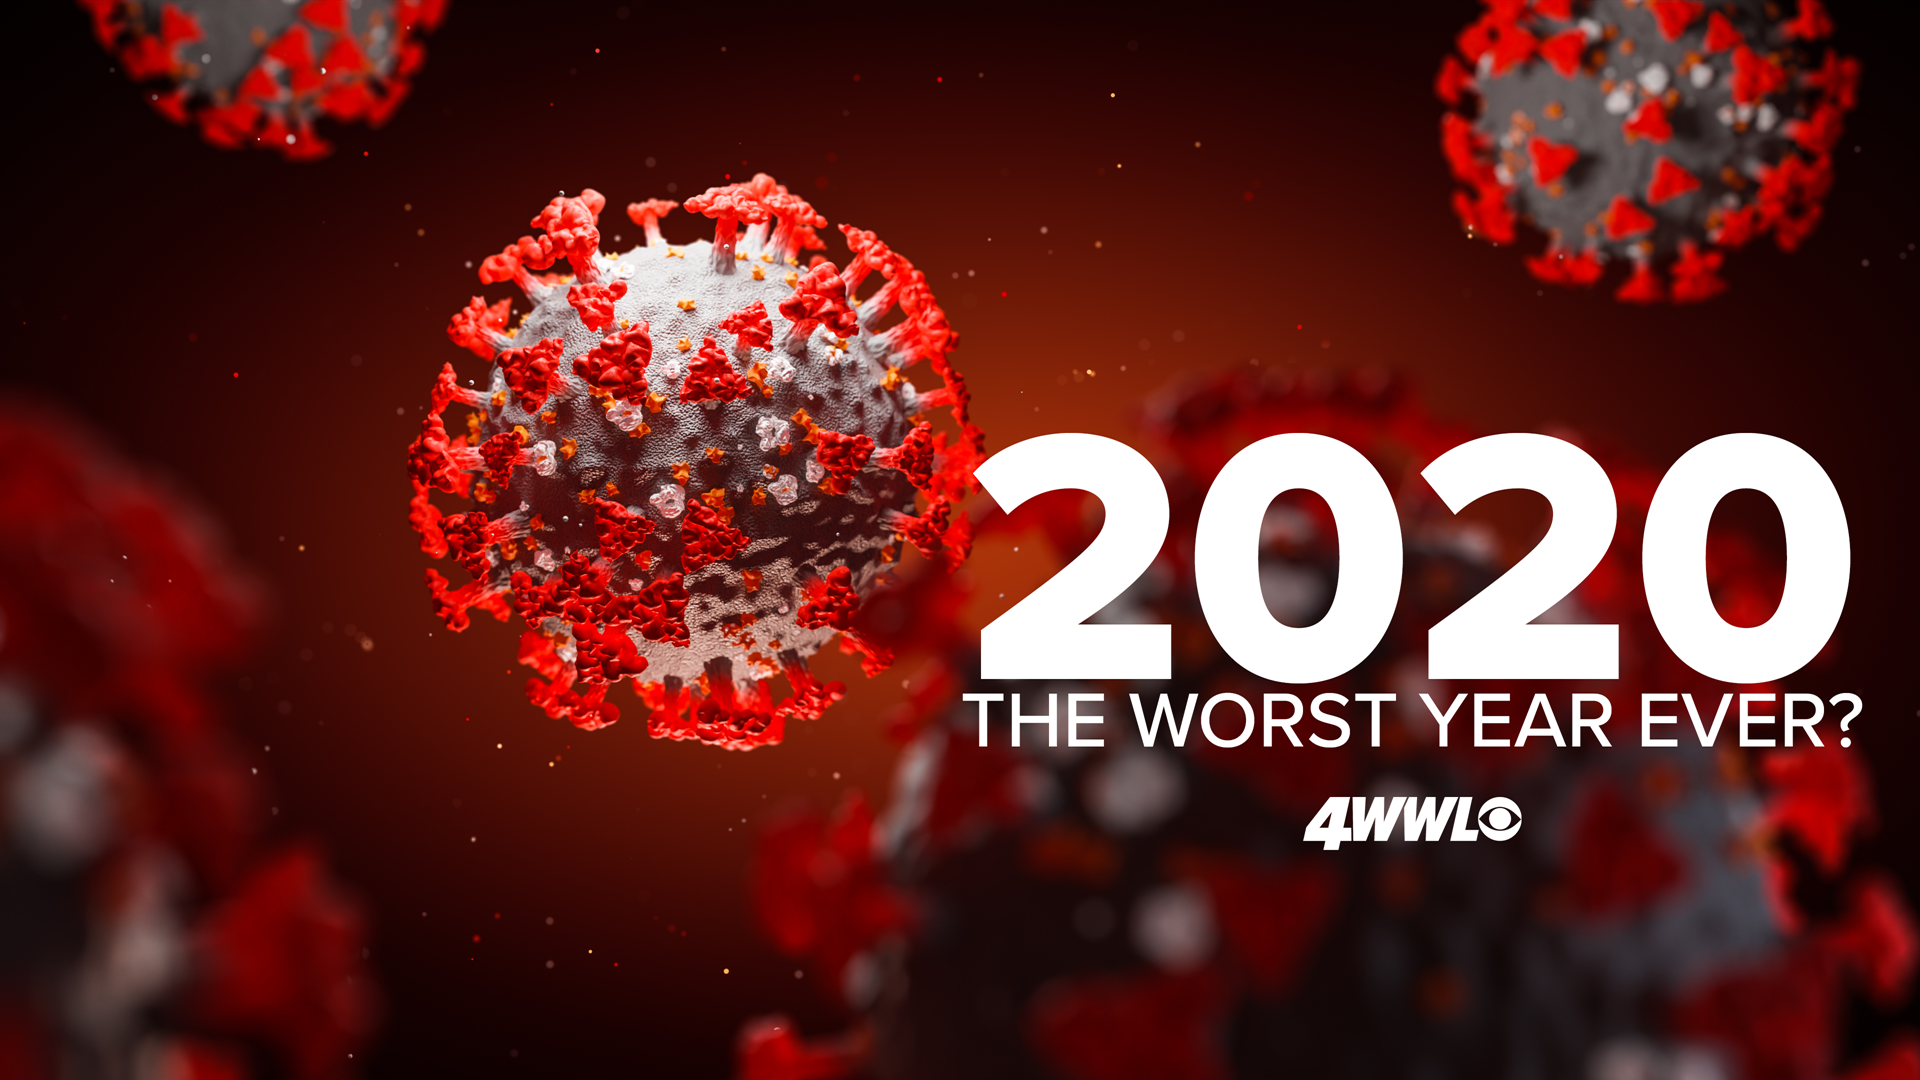 Is 2020 really the worst year ever?